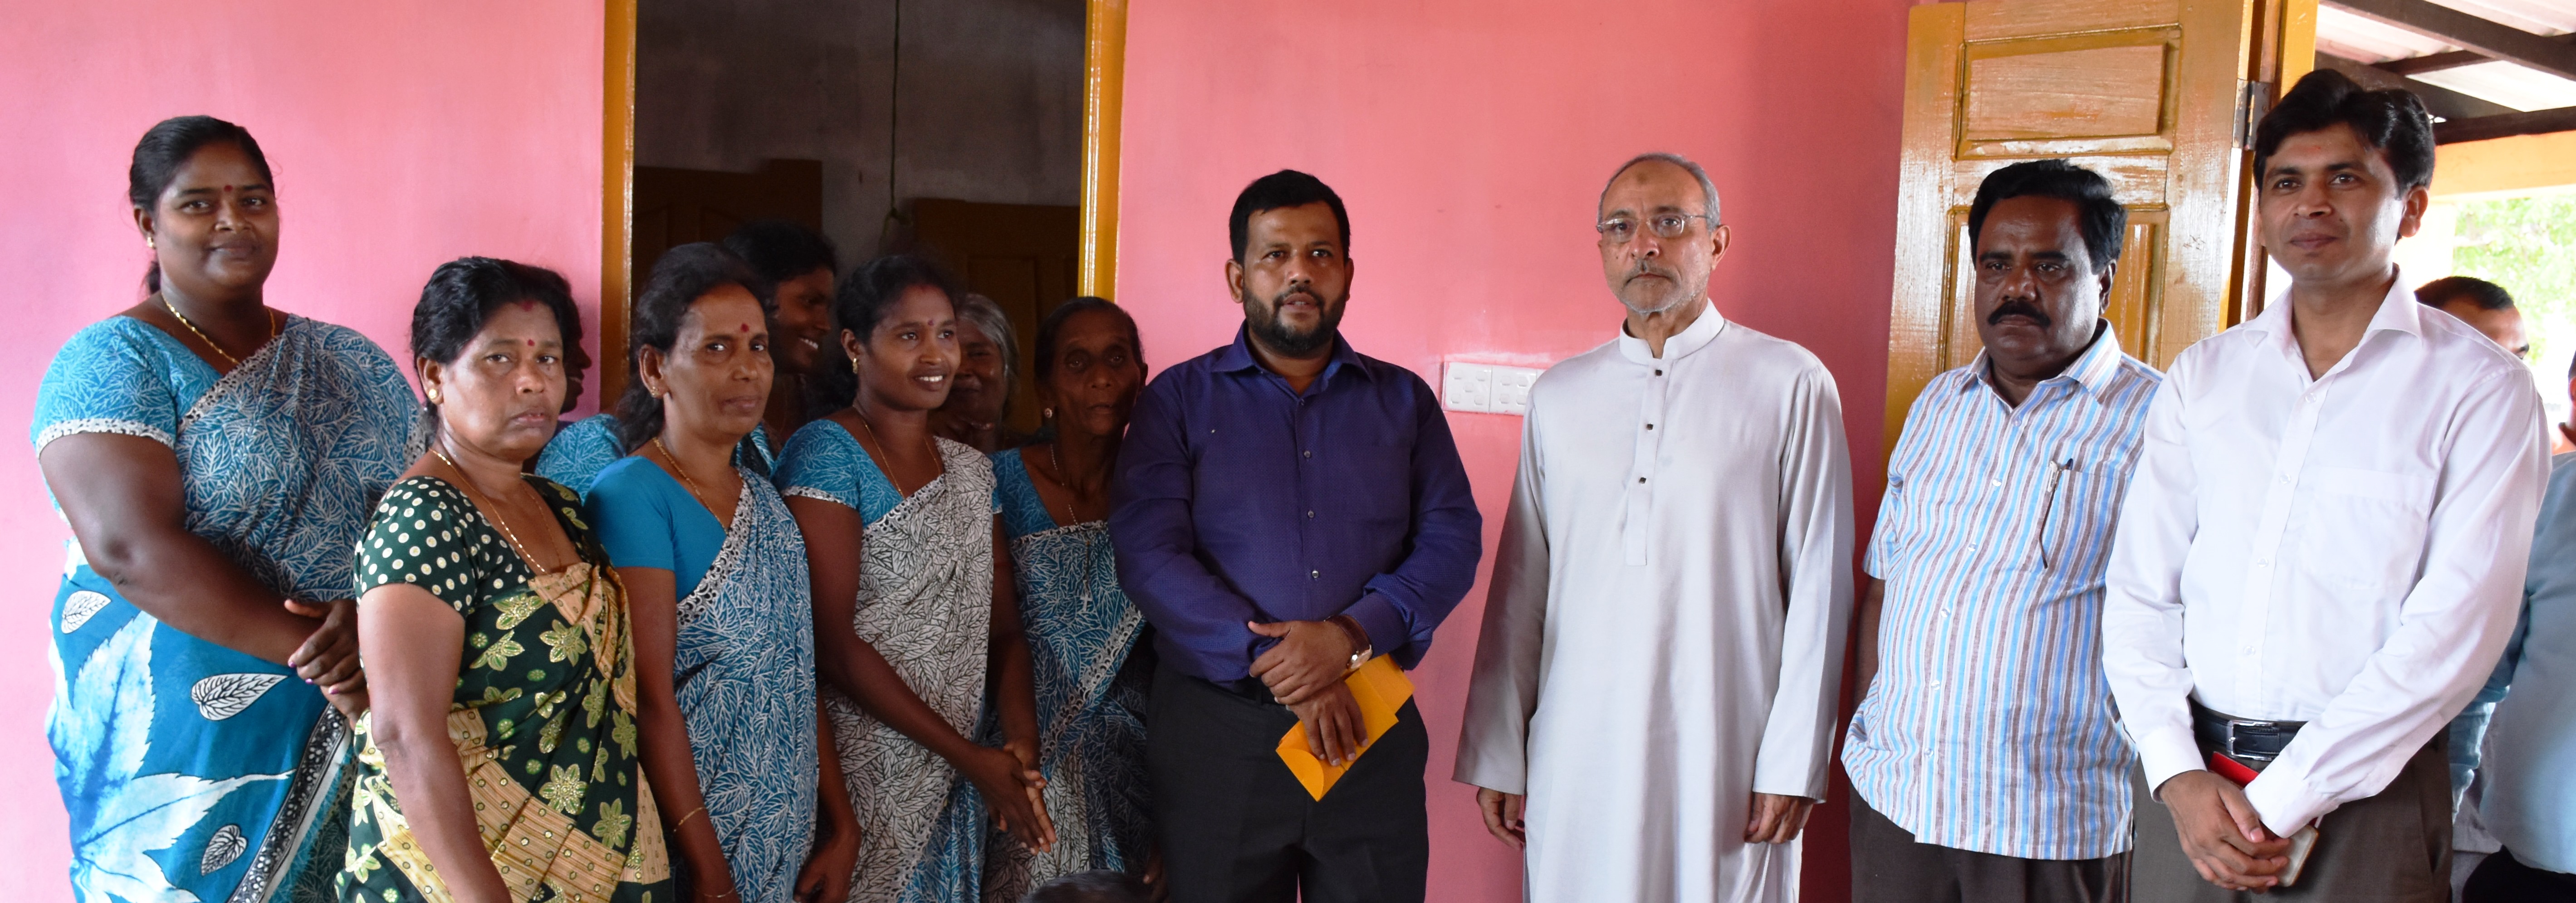 Pakistani envoy  Maj.Gen.Syed Shakeel Hussain with Tamil beneficiaries of the Pakistani housing project.  